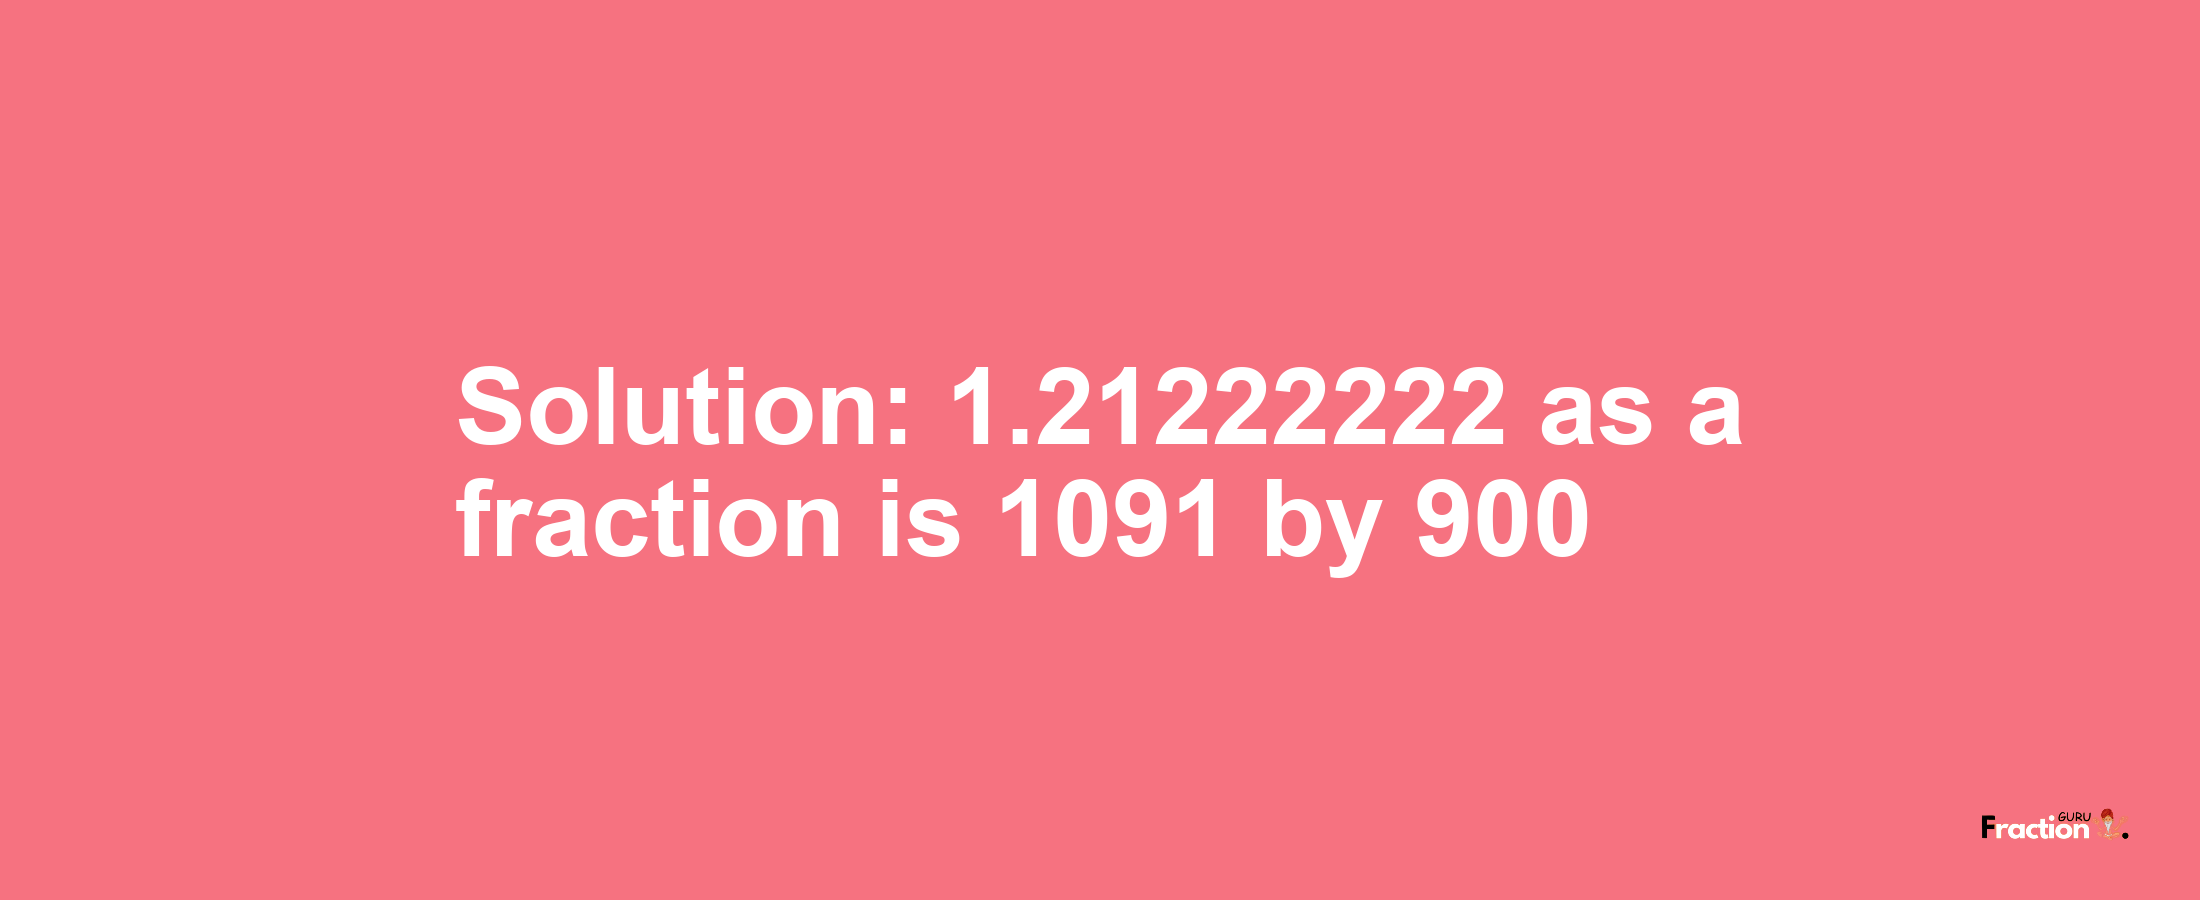 Solution:1.21222222 as a fraction is 1091/900